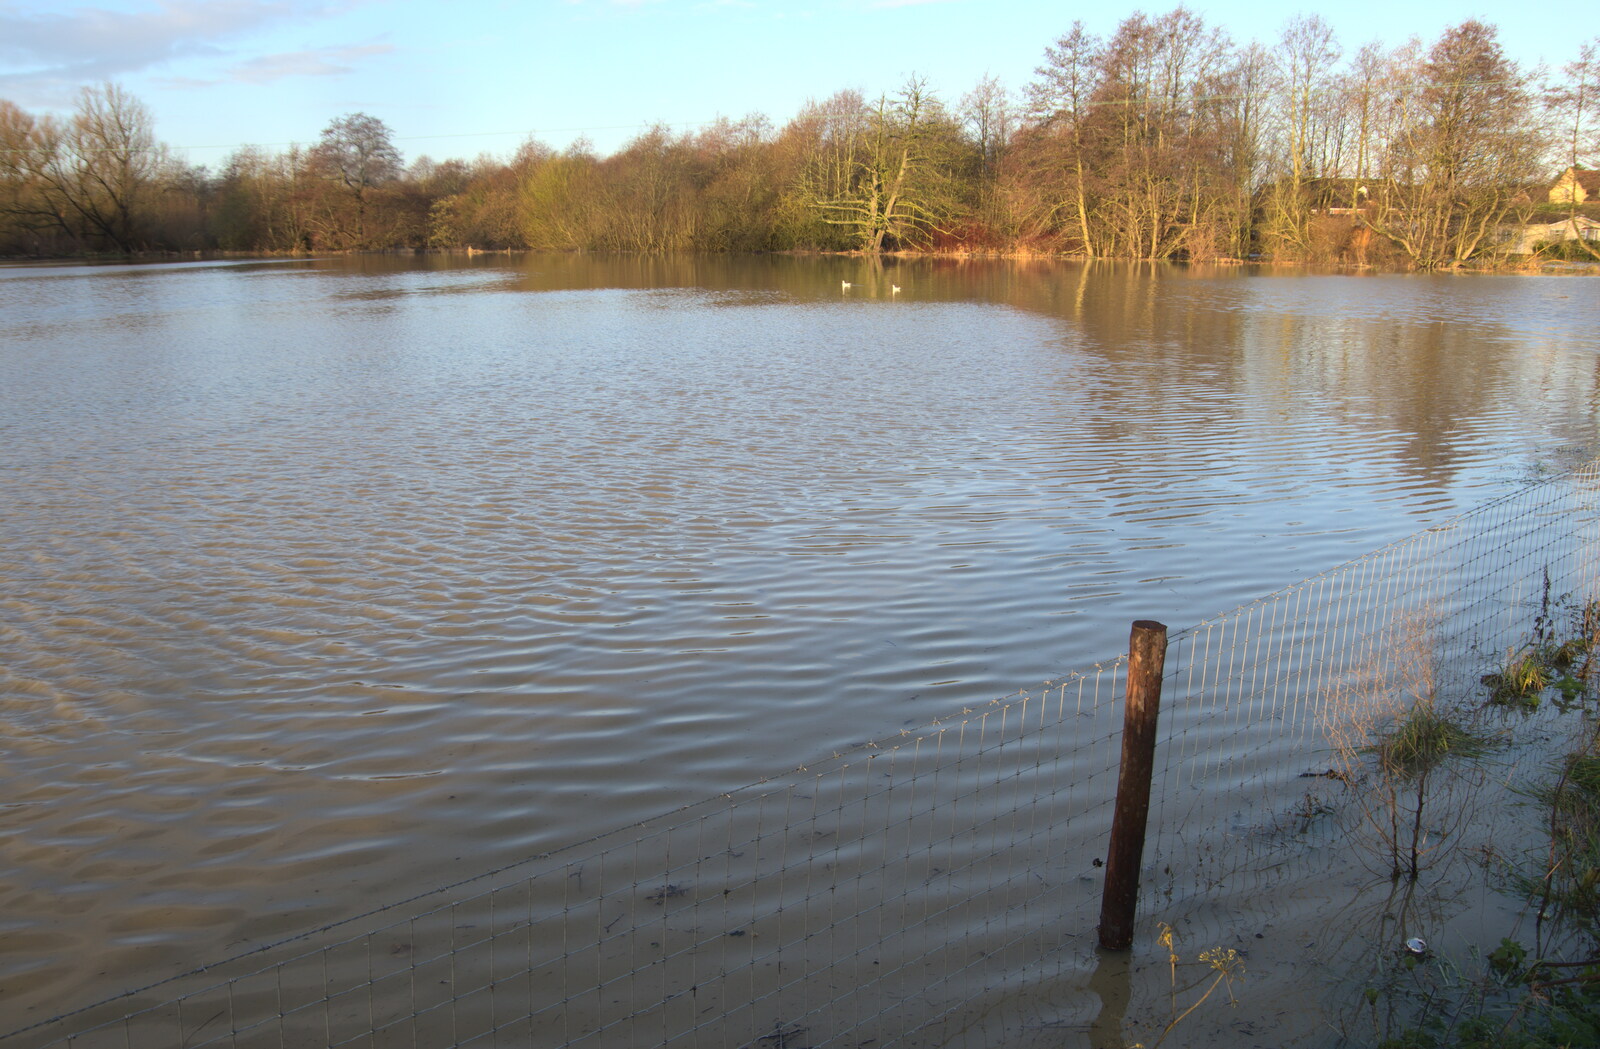 The field on Stuston Road has predictably flooded from The Christmas Eve Floods, Diss, Norfolk - 24th December 2020